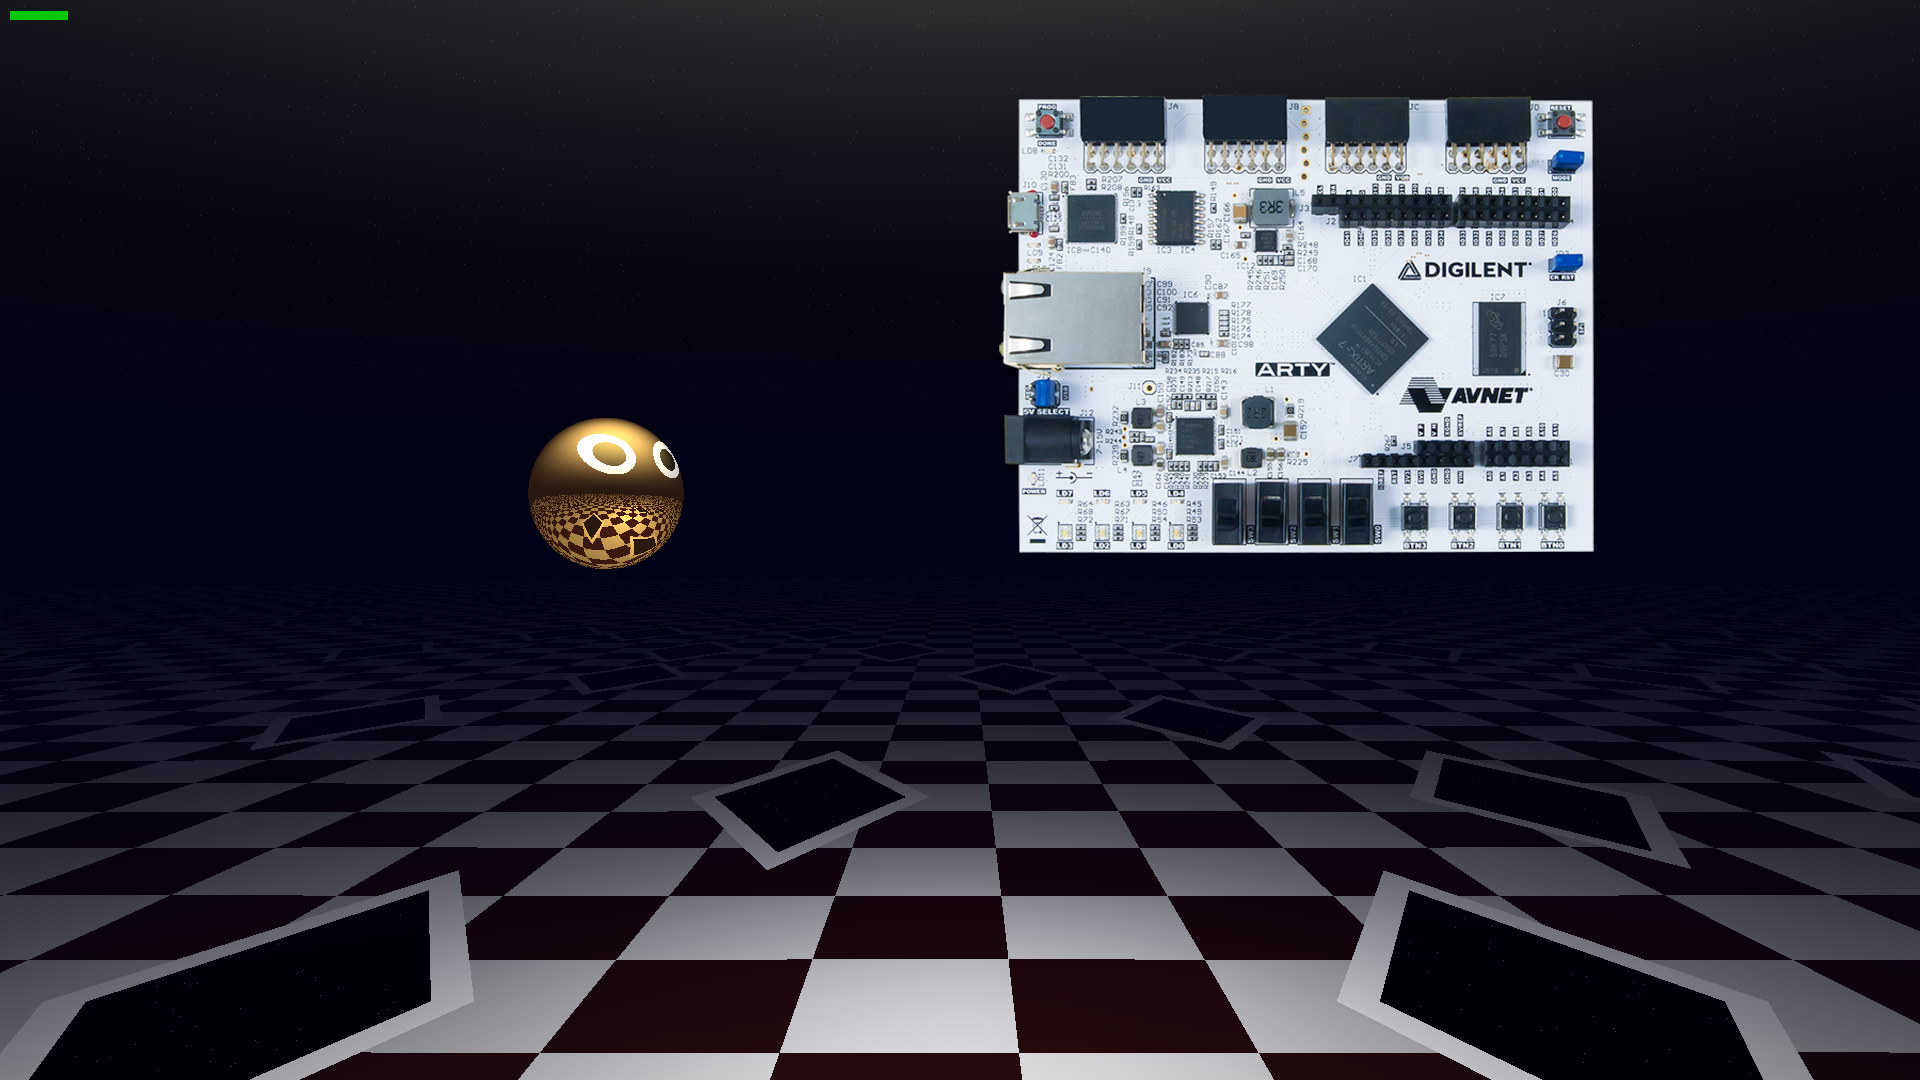 3d-game-running-on-fpga-shown-to-be-50x-more-efficient-than-on-x86-hardware-cnx-software